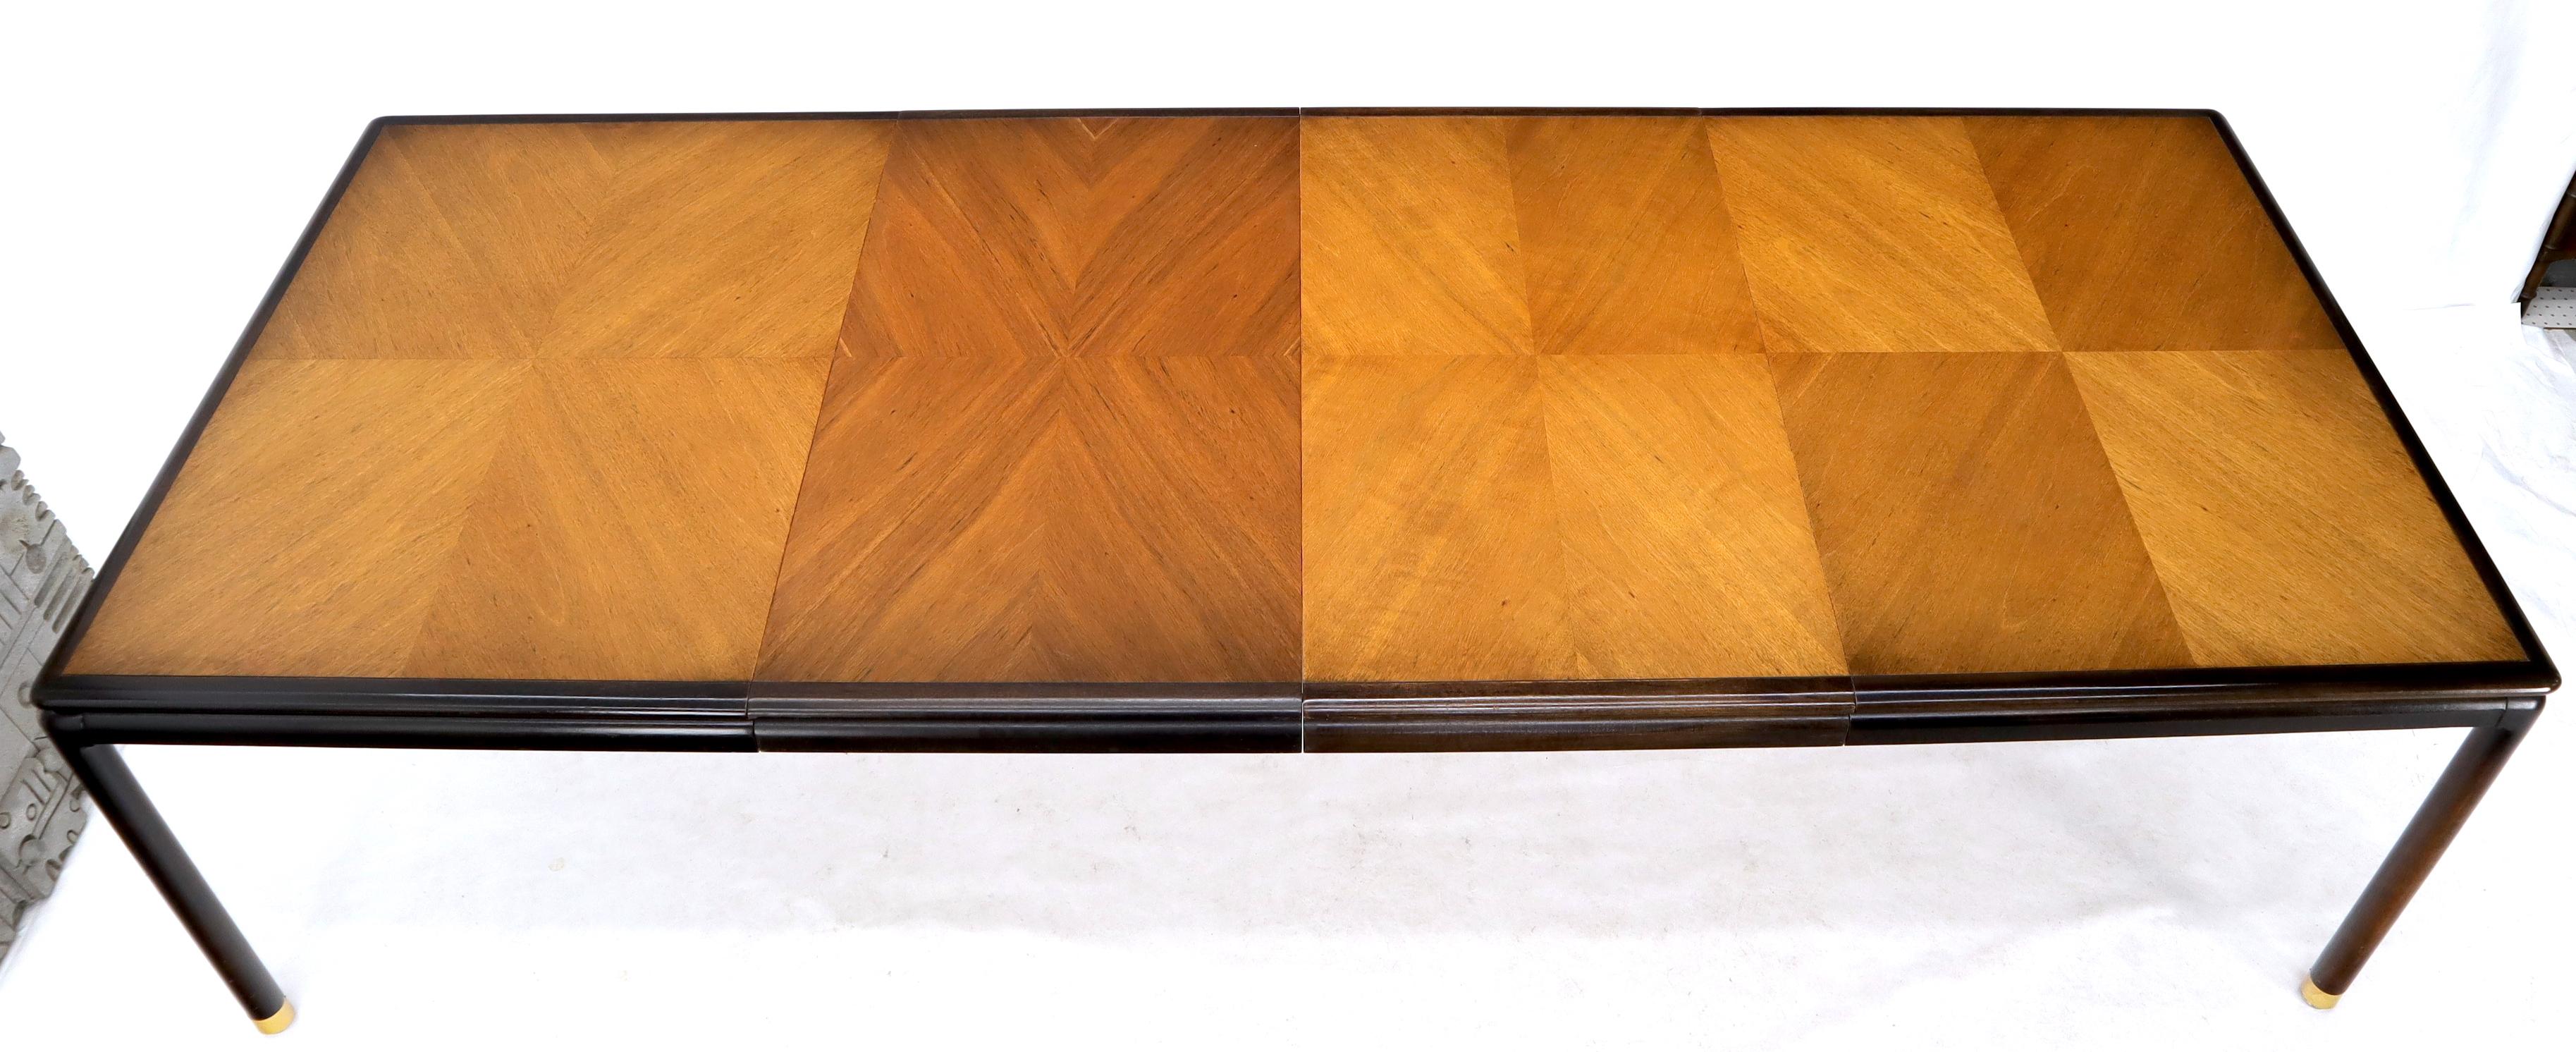 Danish Mid-Century Modern Large Two-Tone Dining Room Table with 2 Leaves In Good Condition For Sale In Rockaway, NJ